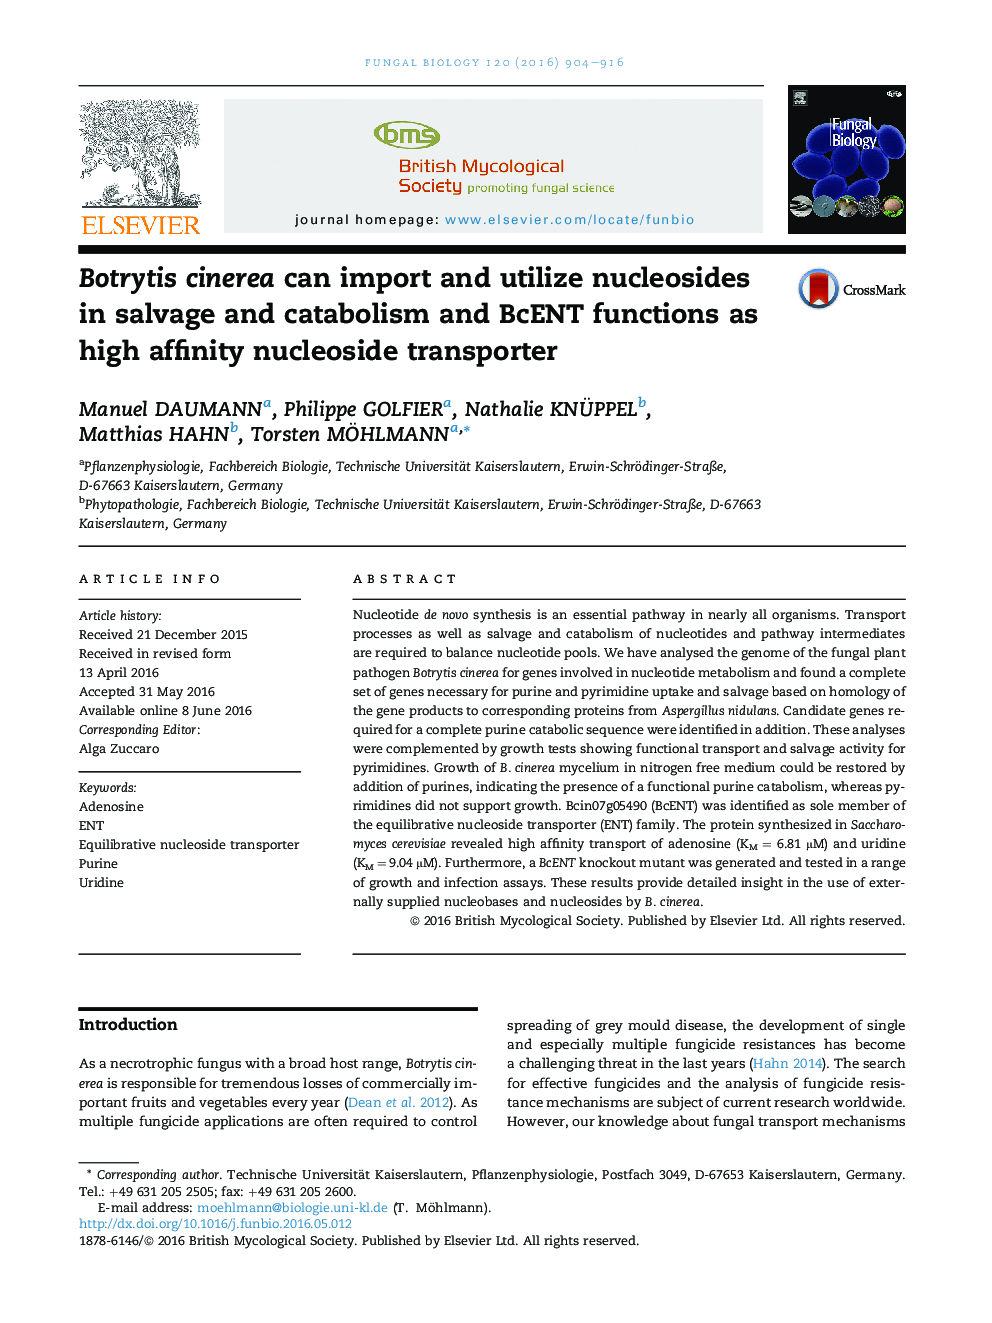 Botrytis cinerea can import and utilize nucleosides in salvage and catabolism and BcENT functions as high affinity nucleoside transporter